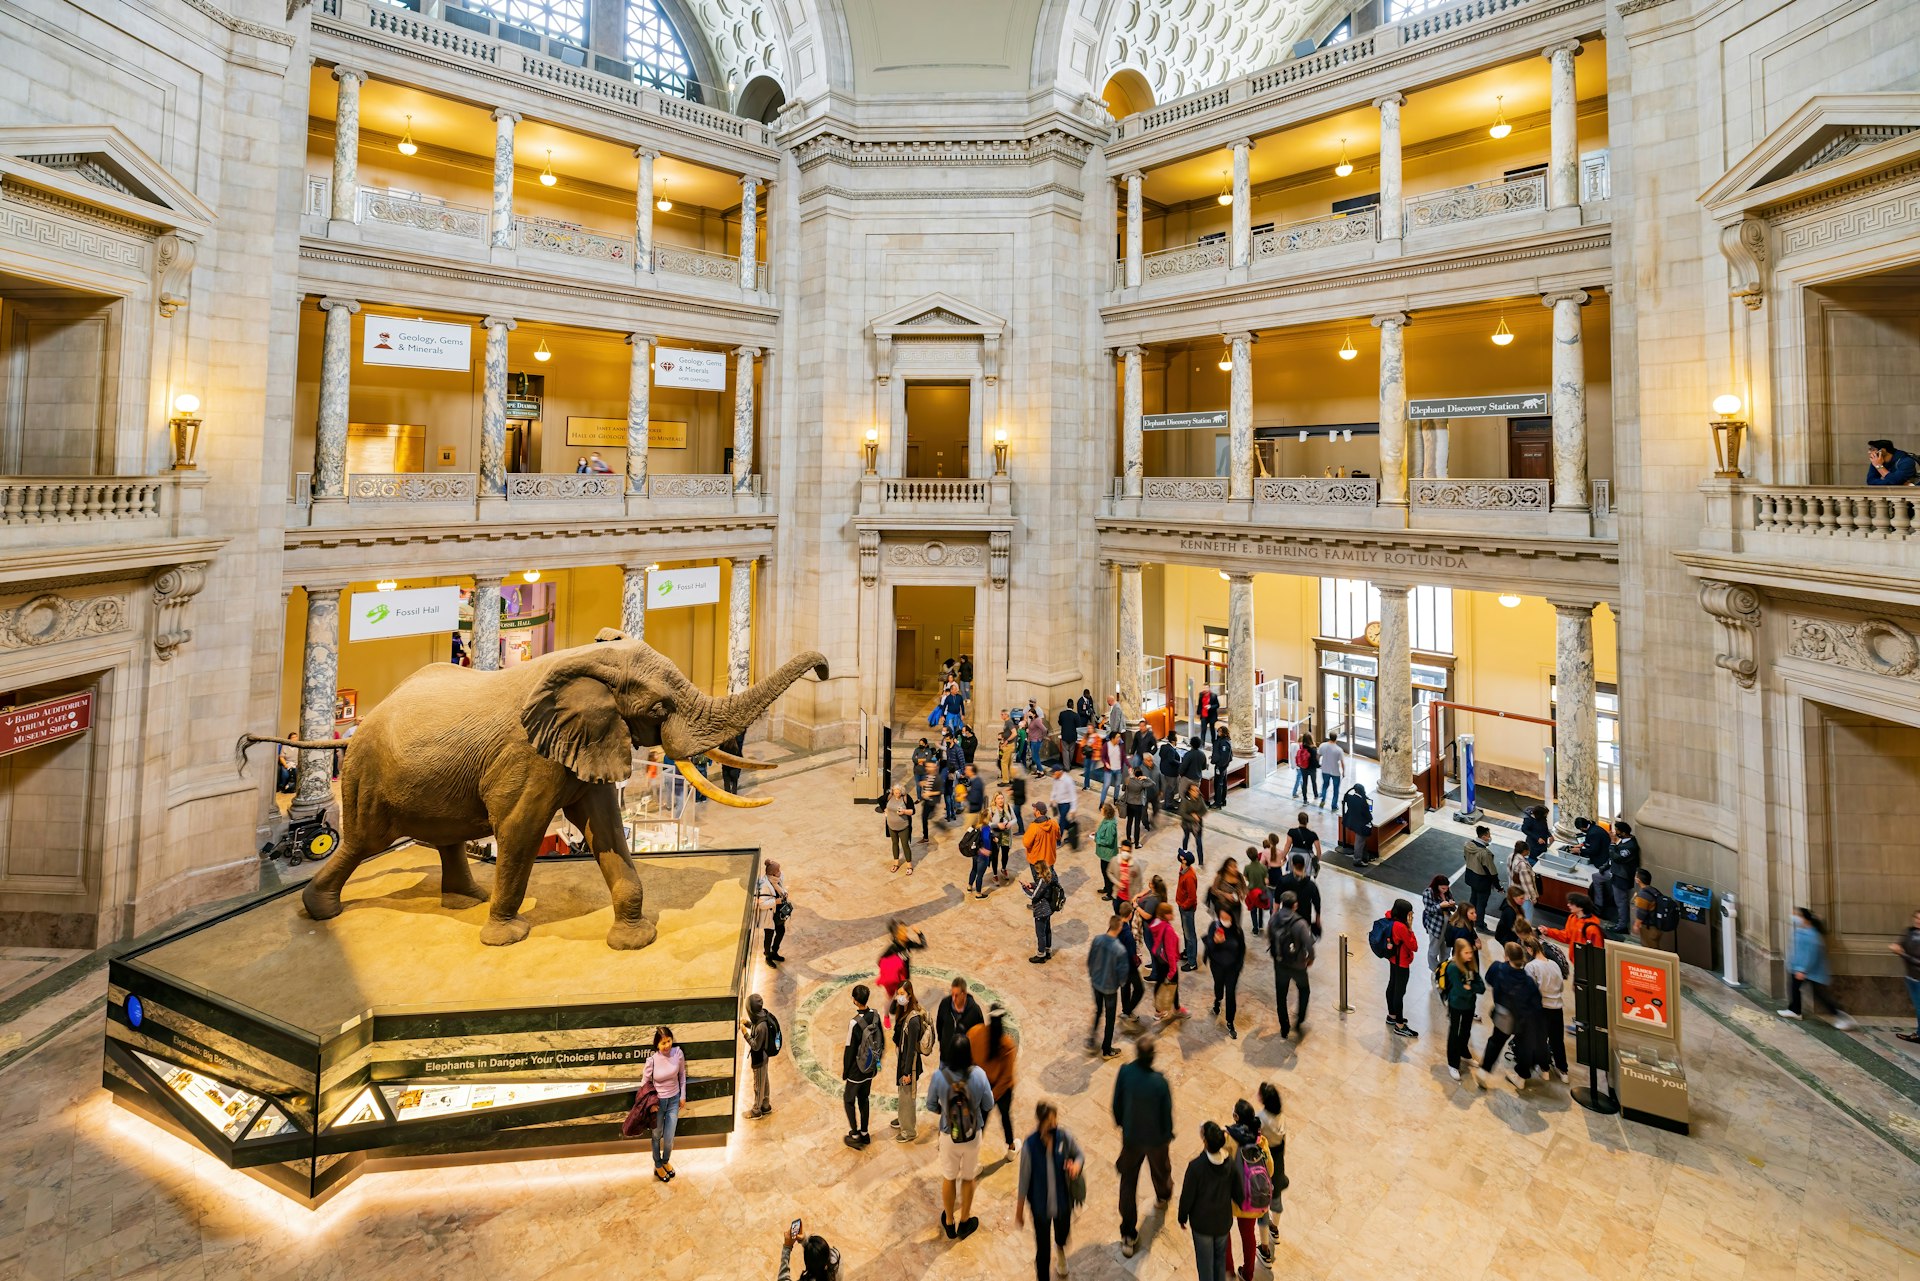 A large stuffed elephant display dominates a hall in a museum